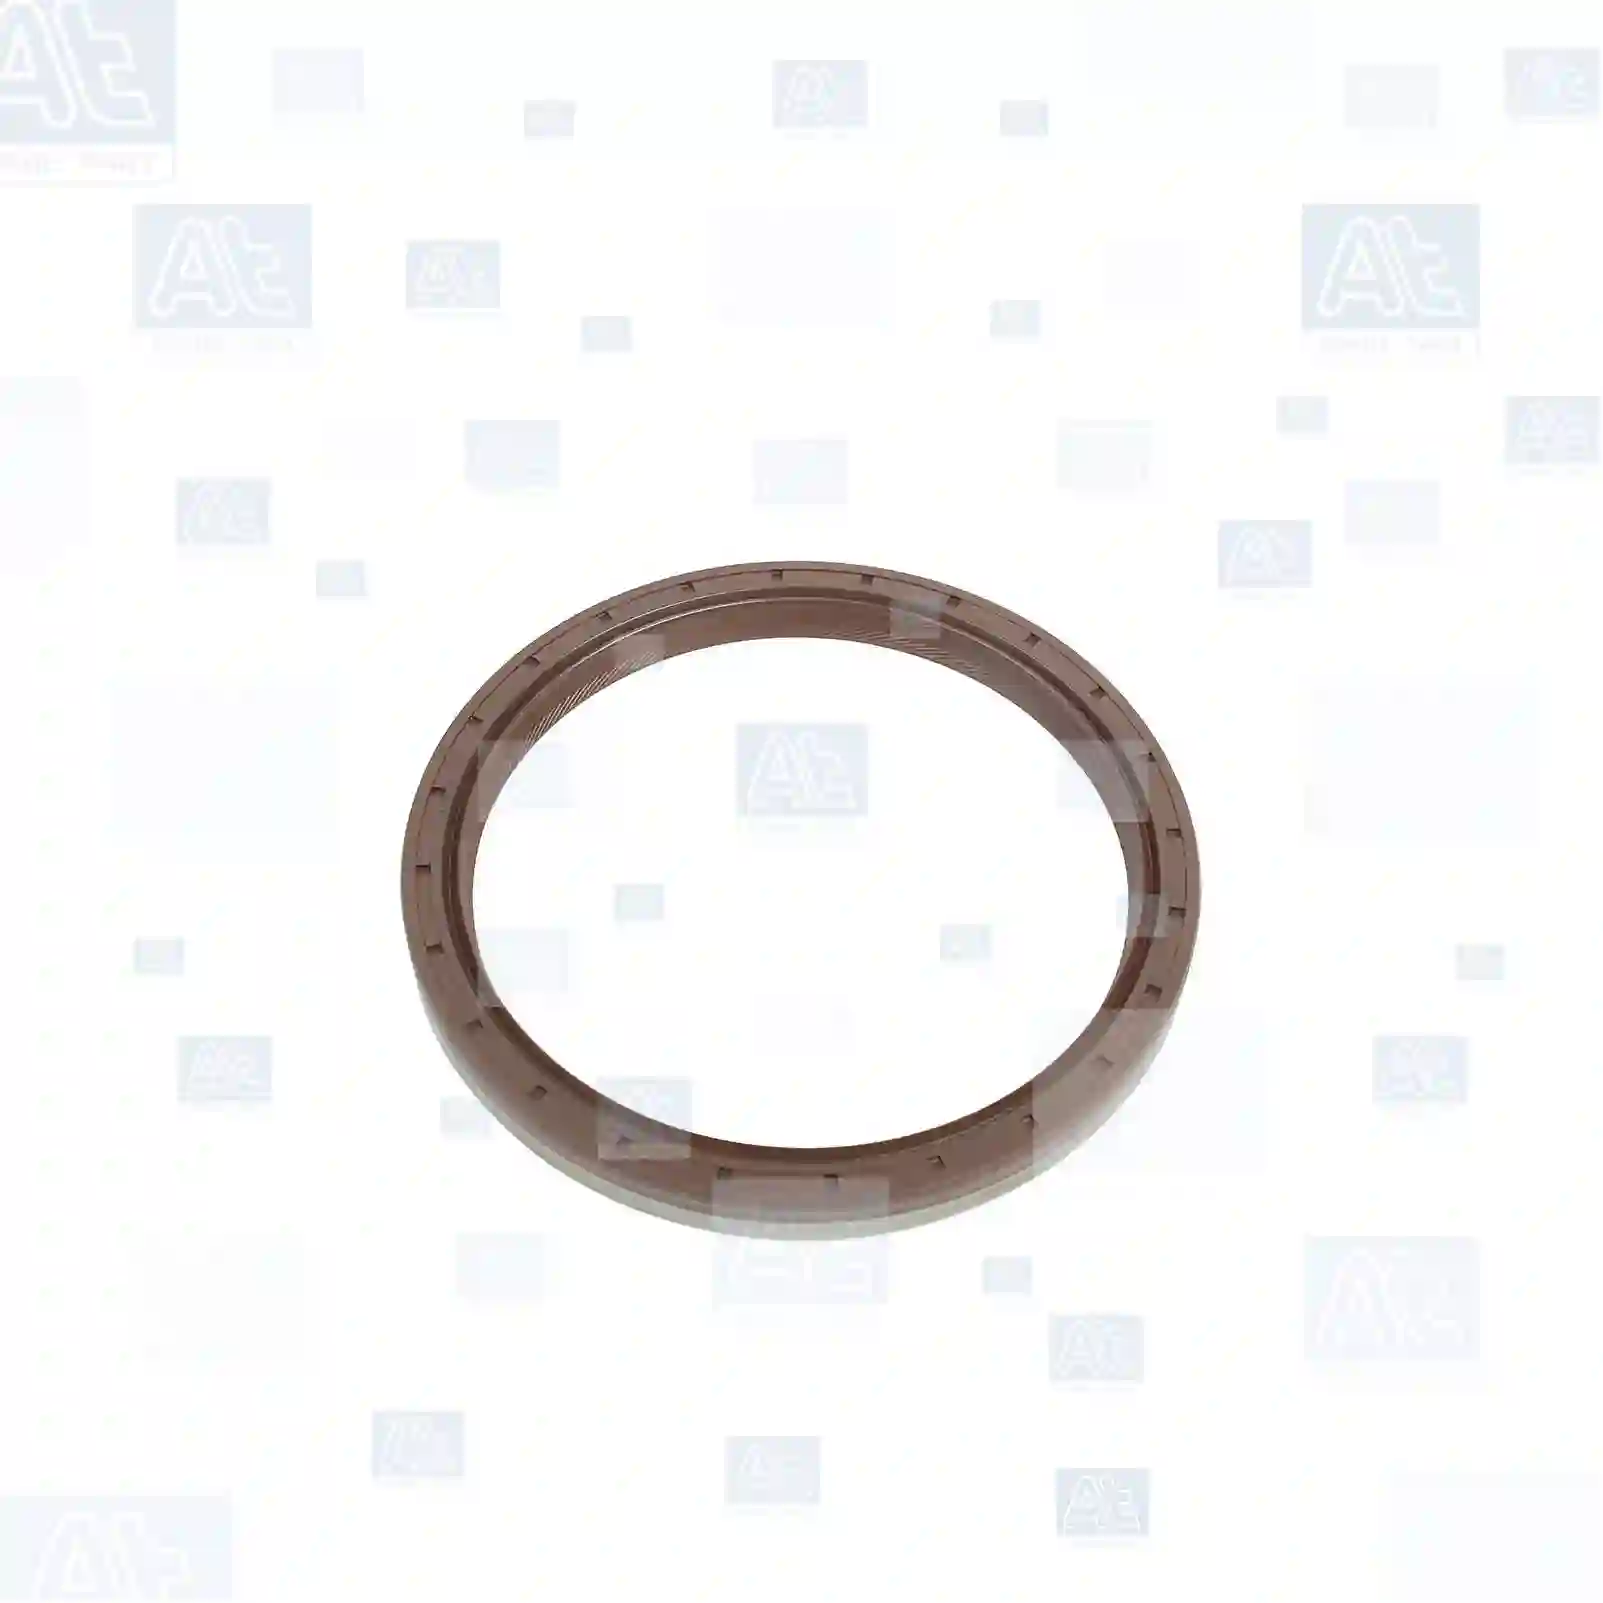 Oil seal, 77702755, 23121205186, 5191358AA, 312153, 96350161, 5191358AA, 07545946, 40004240, 99457401, 96350161, 40003800, 40100880, 40101340, 40102470, 40102473, 98461686, 98488395, 99457401, 5191358AA, 40004240, 99457401, 98461686, 2590A052, 98461686, 98488395, 99457401, 702281, 312153, 5000820862, 90311-30006, 90311-30017, ZG02816-0008 ||  77702755 At Spare Part | Engine, Accelerator Pedal, Camshaft, Connecting Rod, Crankcase, Crankshaft, Cylinder Head, Engine Suspension Mountings, Exhaust Manifold, Exhaust Gas Recirculation, Filter Kits, Flywheel Housing, General Overhaul Kits, Engine, Intake Manifold, Oil Cleaner, Oil Cooler, Oil Filter, Oil Pump, Oil Sump, Piston & Liner, Sensor & Switch, Timing Case, Turbocharger, Cooling System, Belt Tensioner, Coolant Filter, Coolant Pipe, Corrosion Prevention Agent, Drive, Expansion Tank, Fan, Intercooler, Monitors & Gauges, Radiator, Thermostat, V-Belt / Timing belt, Water Pump, Fuel System, Electronical Injector Unit, Feed Pump, Fuel Filter, cpl., Fuel Gauge Sender,  Fuel Line, Fuel Pump, Fuel Tank, Injection Line Kit, Injection Pump, Exhaust System, Clutch & Pedal, Gearbox, Propeller Shaft, Axles, Brake System, Hubs & Wheels, Suspension, Leaf Spring, Universal Parts / Accessories, Steering, Electrical System, Cabin Oil seal, 77702755, 23121205186, 5191358AA, 312153, 96350161, 5191358AA, 07545946, 40004240, 99457401, 96350161, 40003800, 40100880, 40101340, 40102470, 40102473, 98461686, 98488395, 99457401, 5191358AA, 40004240, 99457401, 98461686, 2590A052, 98461686, 98488395, 99457401, 702281, 312153, 5000820862, 90311-30006, 90311-30017, ZG02816-0008 ||  77702755 At Spare Part | Engine, Accelerator Pedal, Camshaft, Connecting Rod, Crankcase, Crankshaft, Cylinder Head, Engine Suspension Mountings, Exhaust Manifold, Exhaust Gas Recirculation, Filter Kits, Flywheel Housing, General Overhaul Kits, Engine, Intake Manifold, Oil Cleaner, Oil Cooler, Oil Filter, Oil Pump, Oil Sump, Piston & Liner, Sensor & Switch, Timing Case, Turbocharger, Cooling System, Belt Tensioner, Coolant Filter, Coolant Pipe, Corrosion Prevention Agent, Drive, Expansion Tank, Fan, Intercooler, Monitors & Gauges, Radiator, Thermostat, V-Belt / Timing belt, Water Pump, Fuel System, Electronical Injector Unit, Feed Pump, Fuel Filter, cpl., Fuel Gauge Sender,  Fuel Line, Fuel Pump, Fuel Tank, Injection Line Kit, Injection Pump, Exhaust System, Clutch & Pedal, Gearbox, Propeller Shaft, Axles, Brake System, Hubs & Wheels, Suspension, Leaf Spring, Universal Parts / Accessories, Steering, Electrical System, Cabin